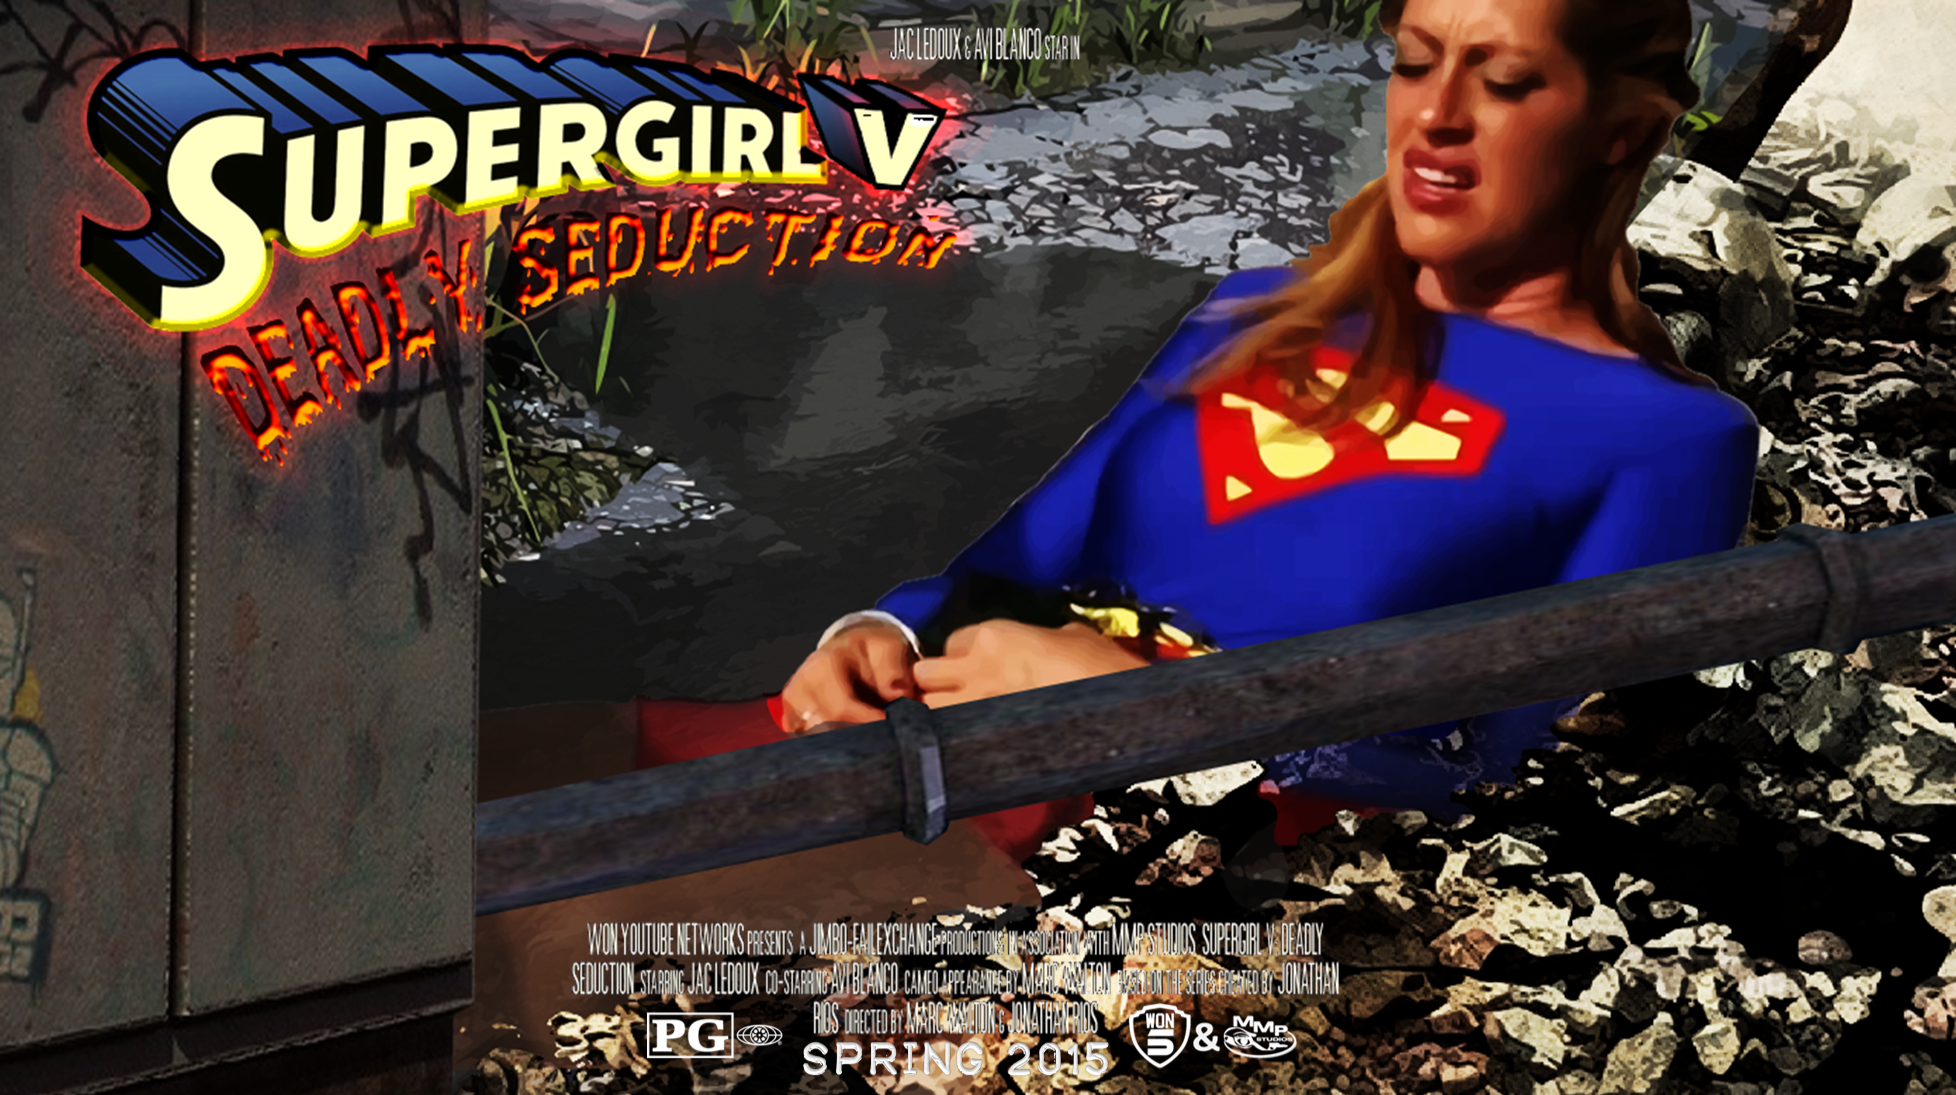 SupergirlVtrapposterBIG.png